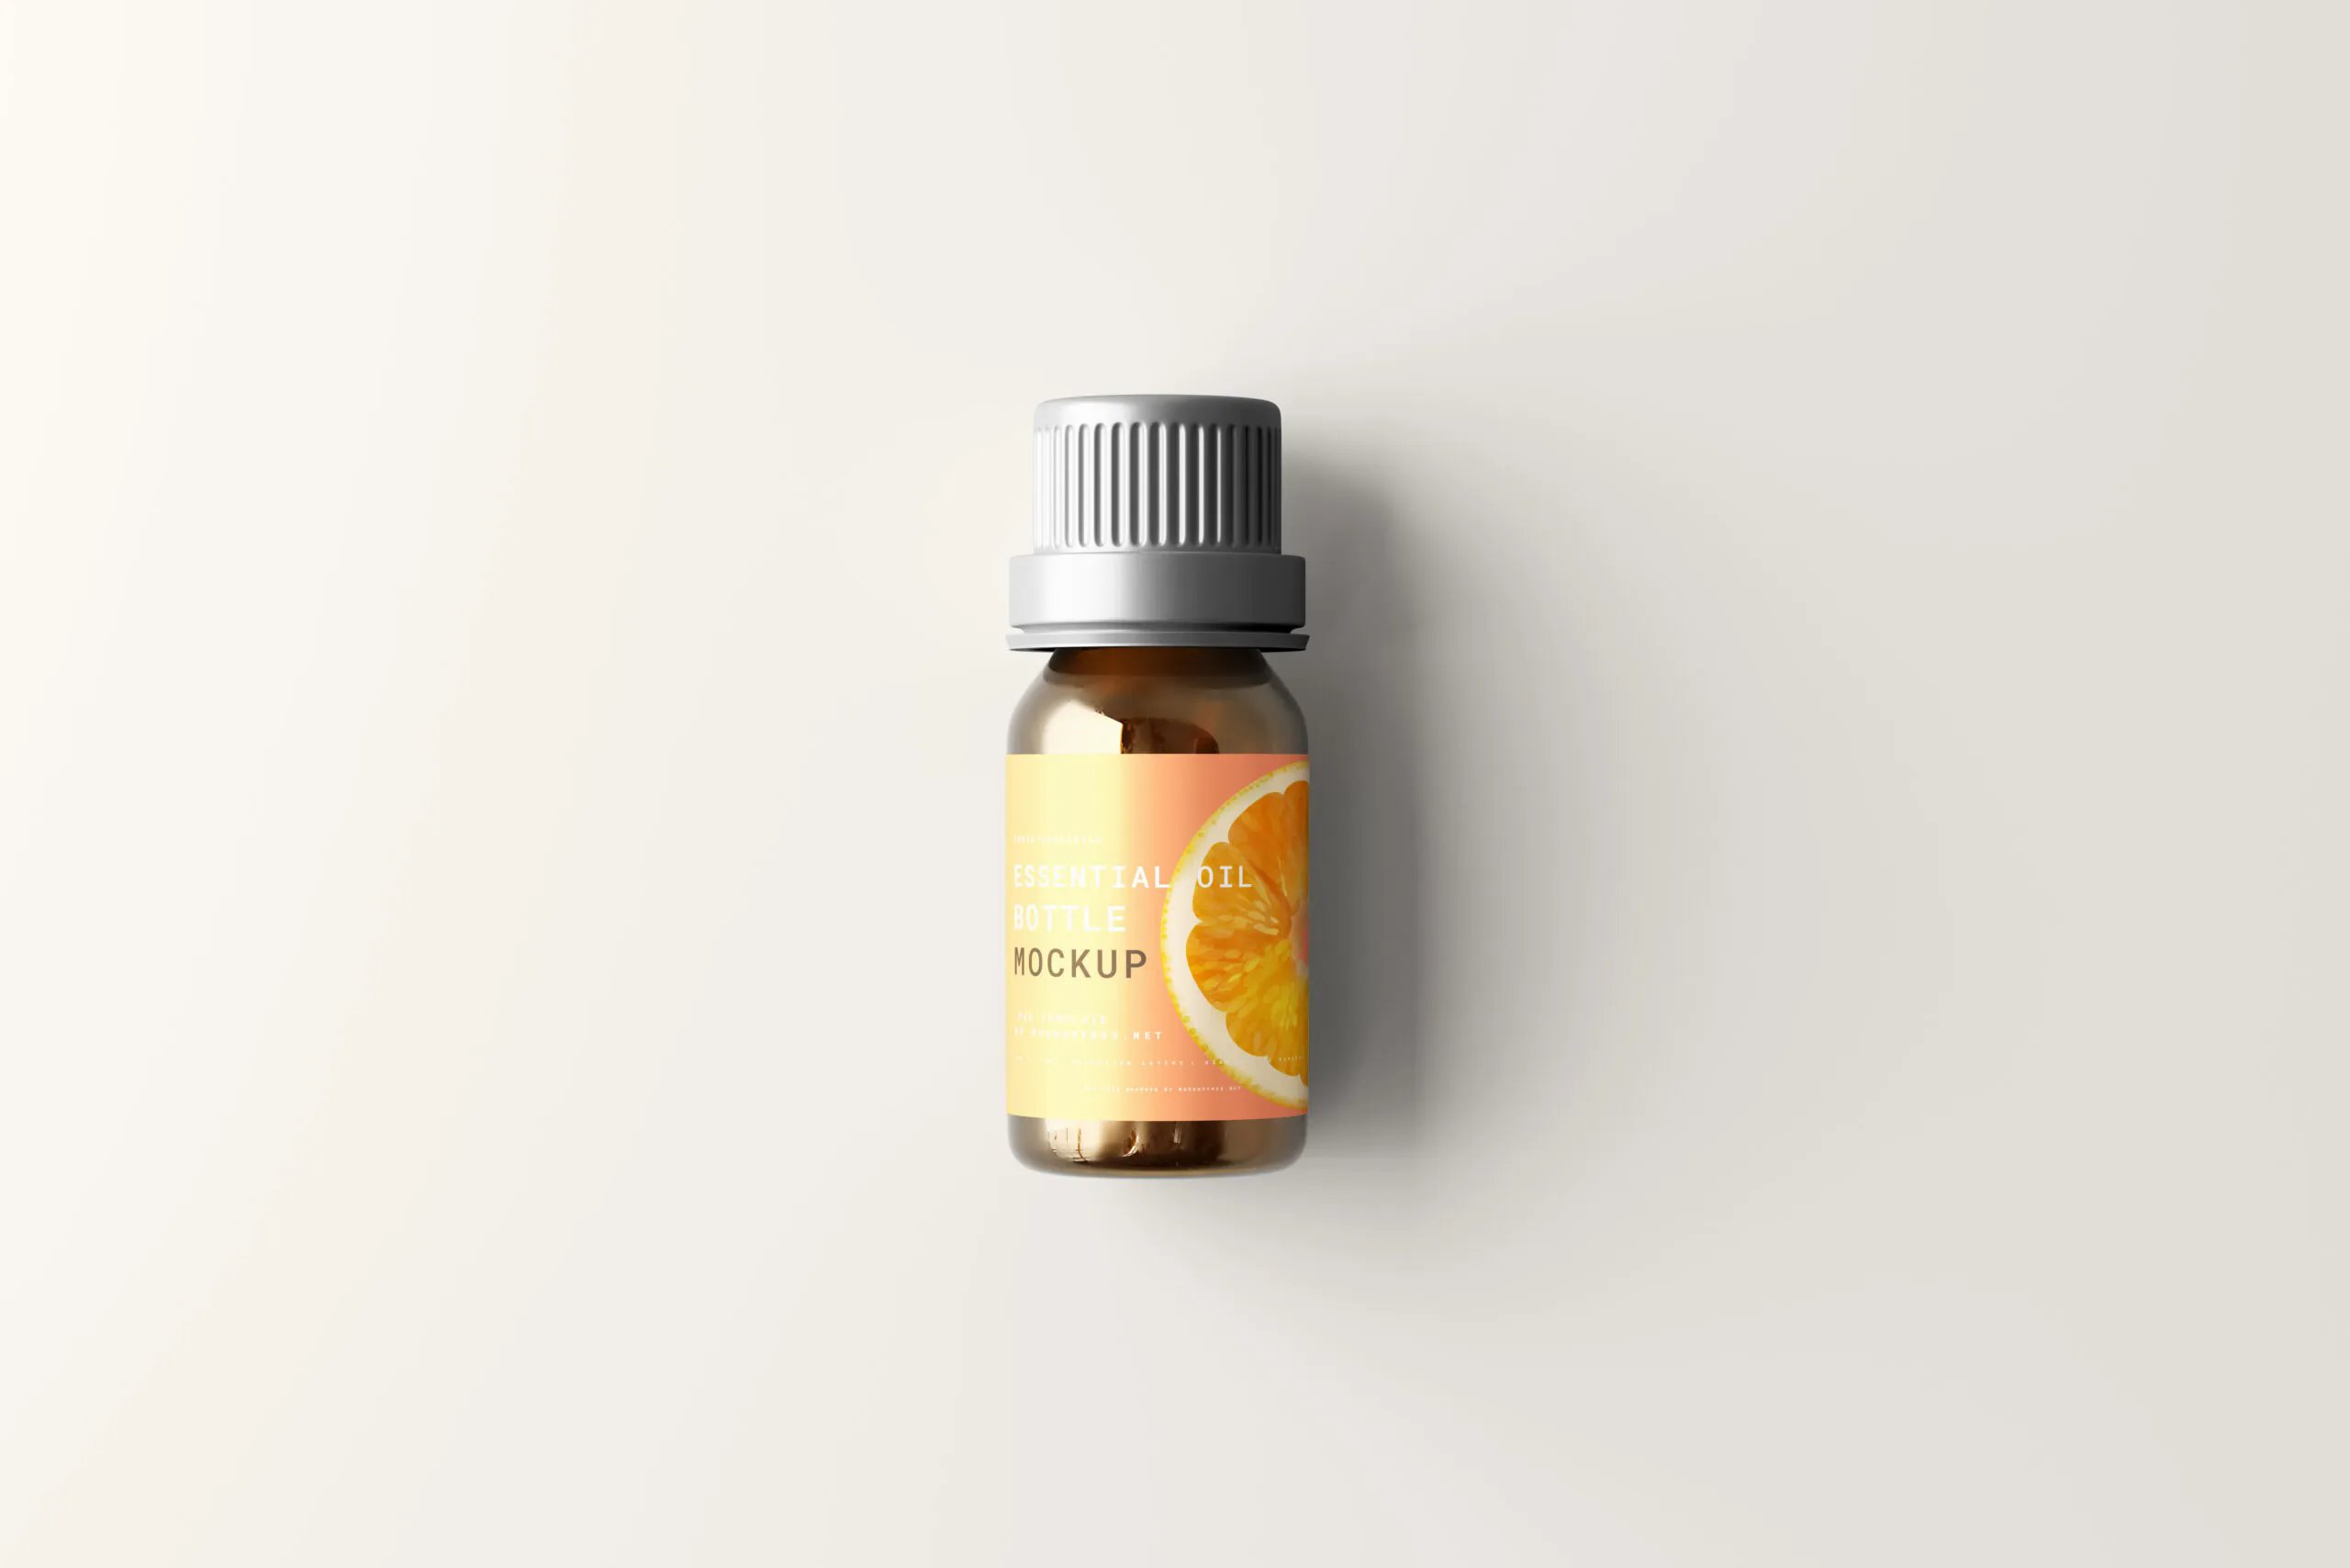 5 Small Essential Oil Bottle Mockups in Distinct Visions FREE PSD